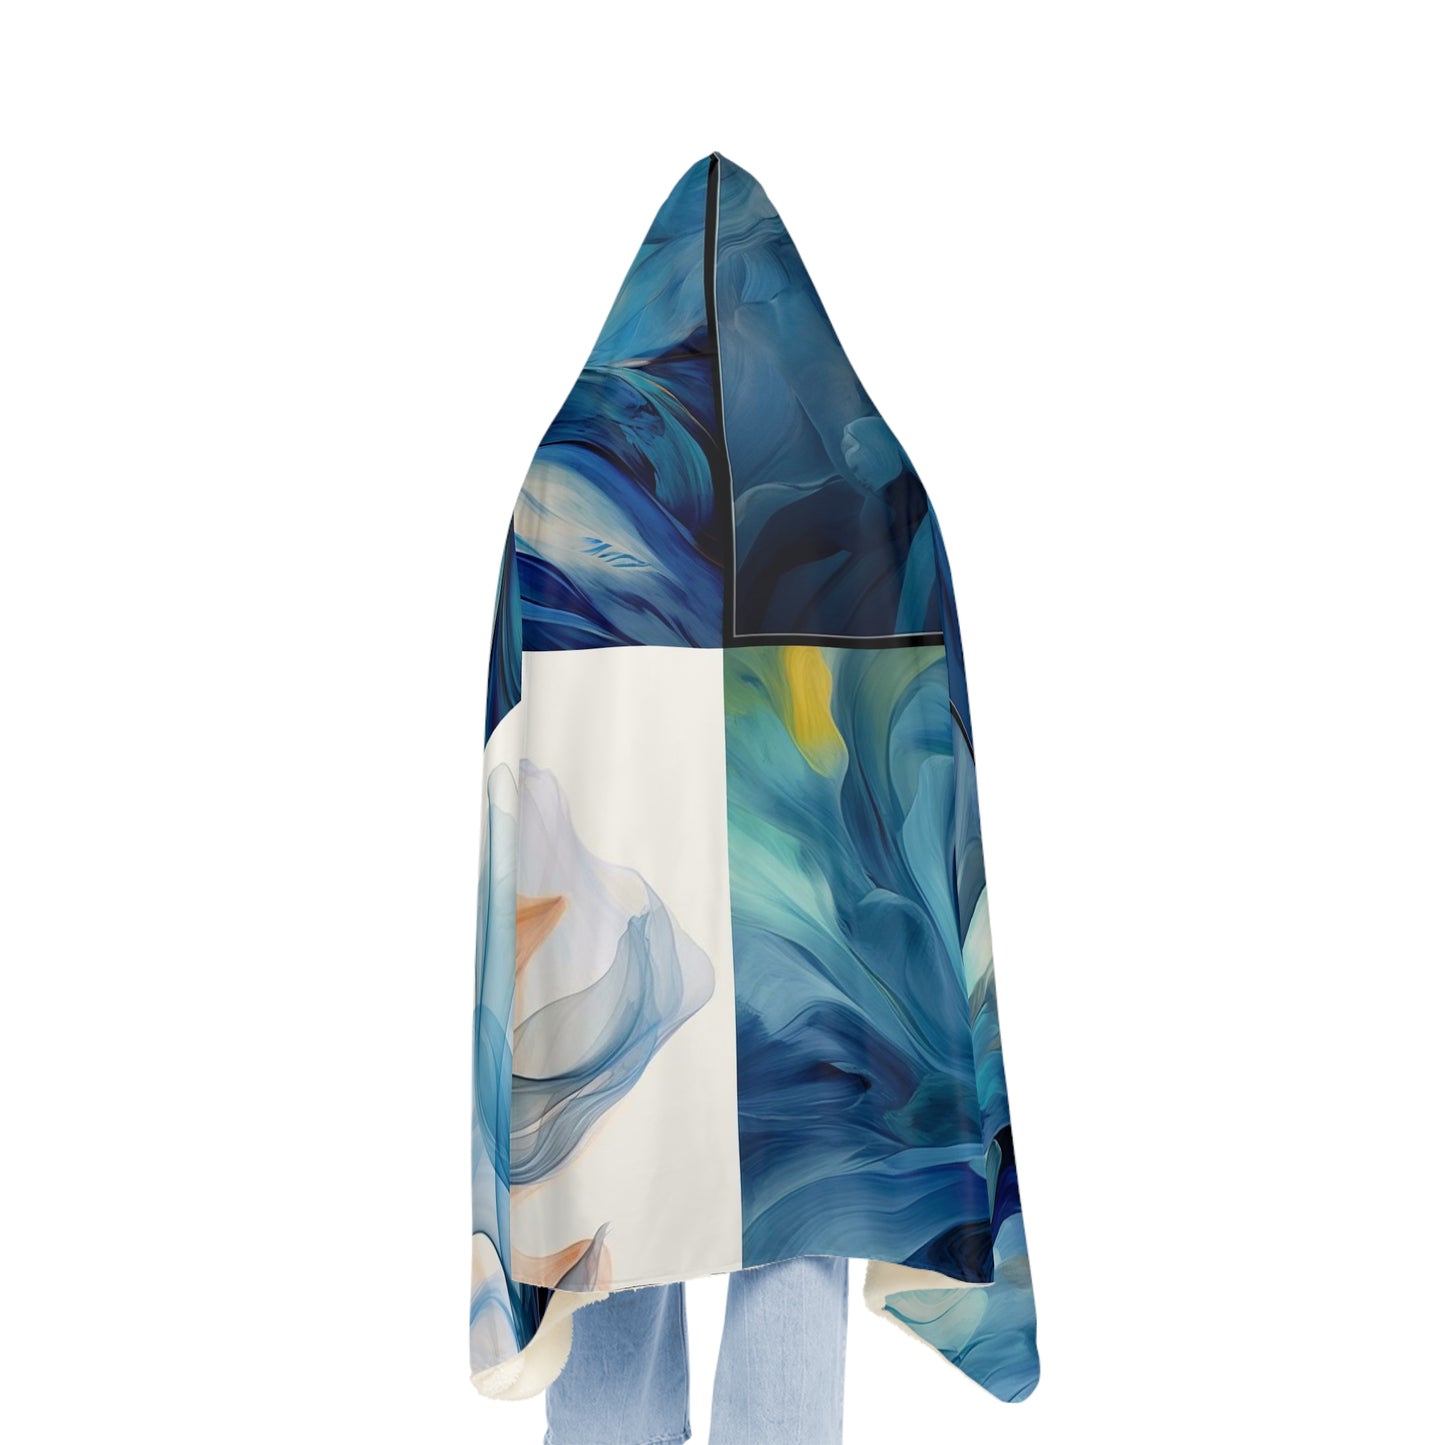 Snuggle Hooded Blanket Blue Tluip Abstract 5